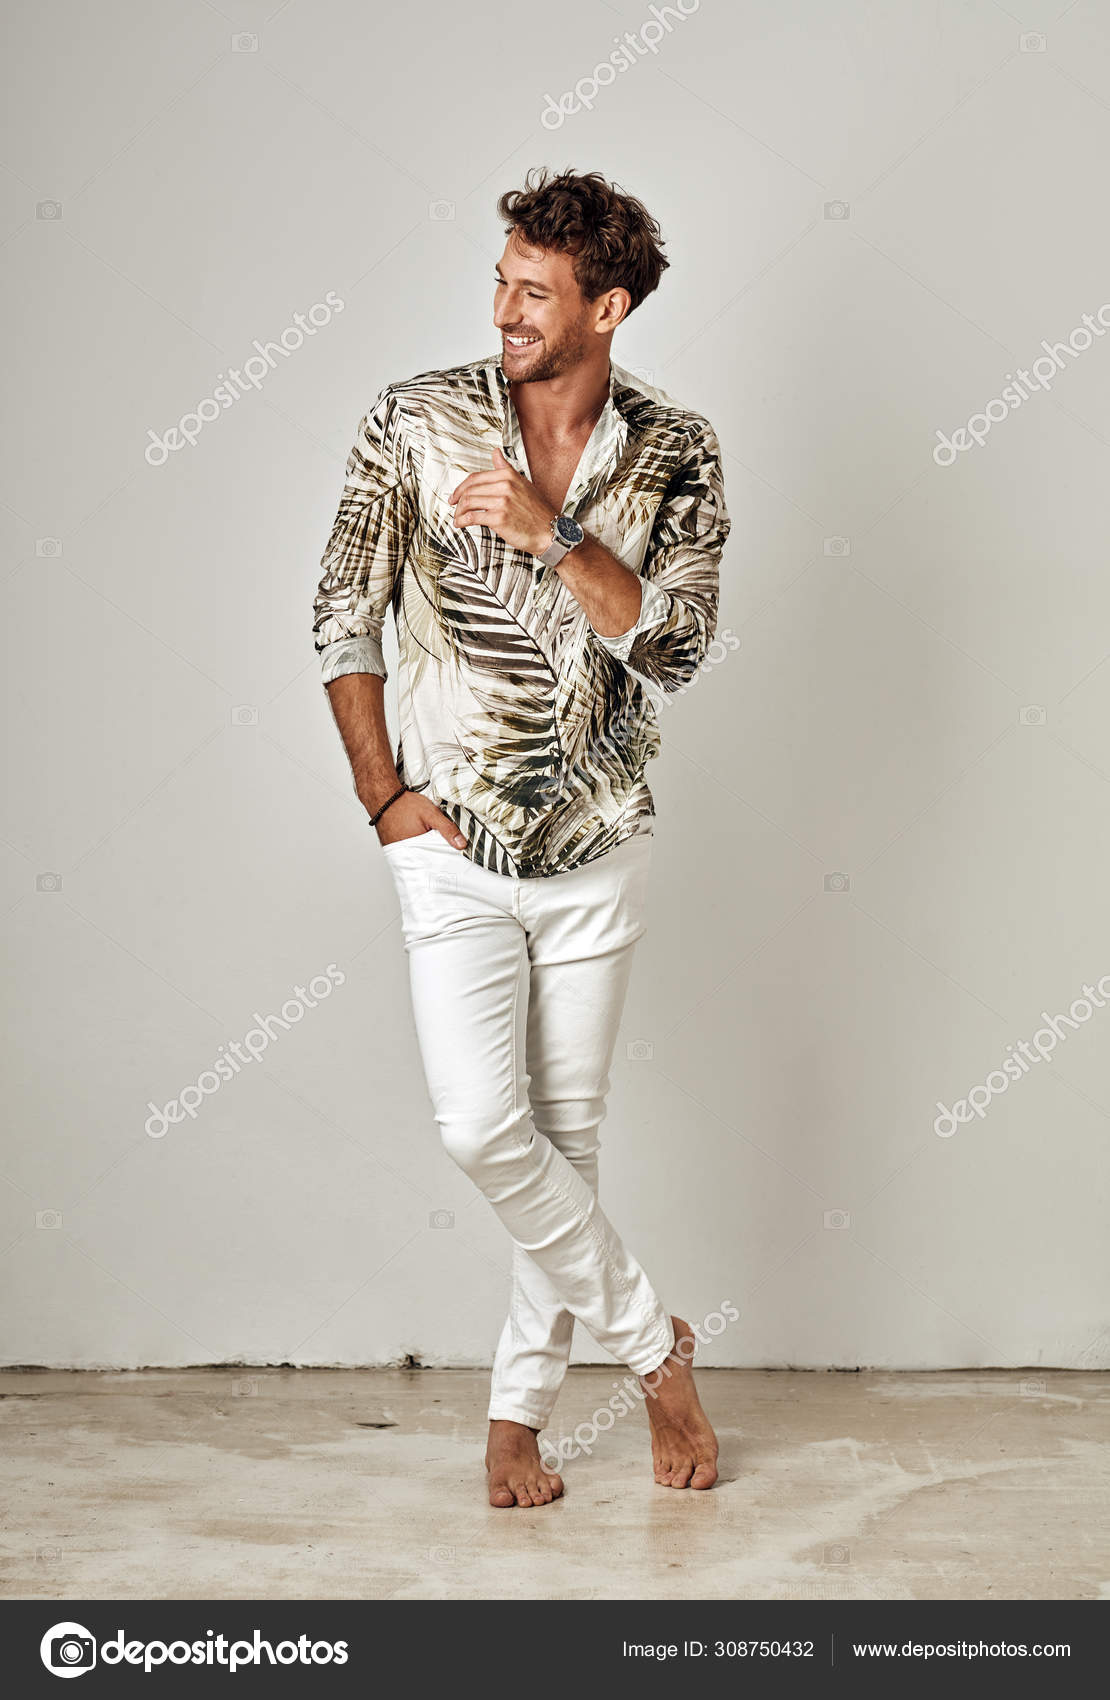 depositphotos 308750432 stock photo handsome man summer outfit posing